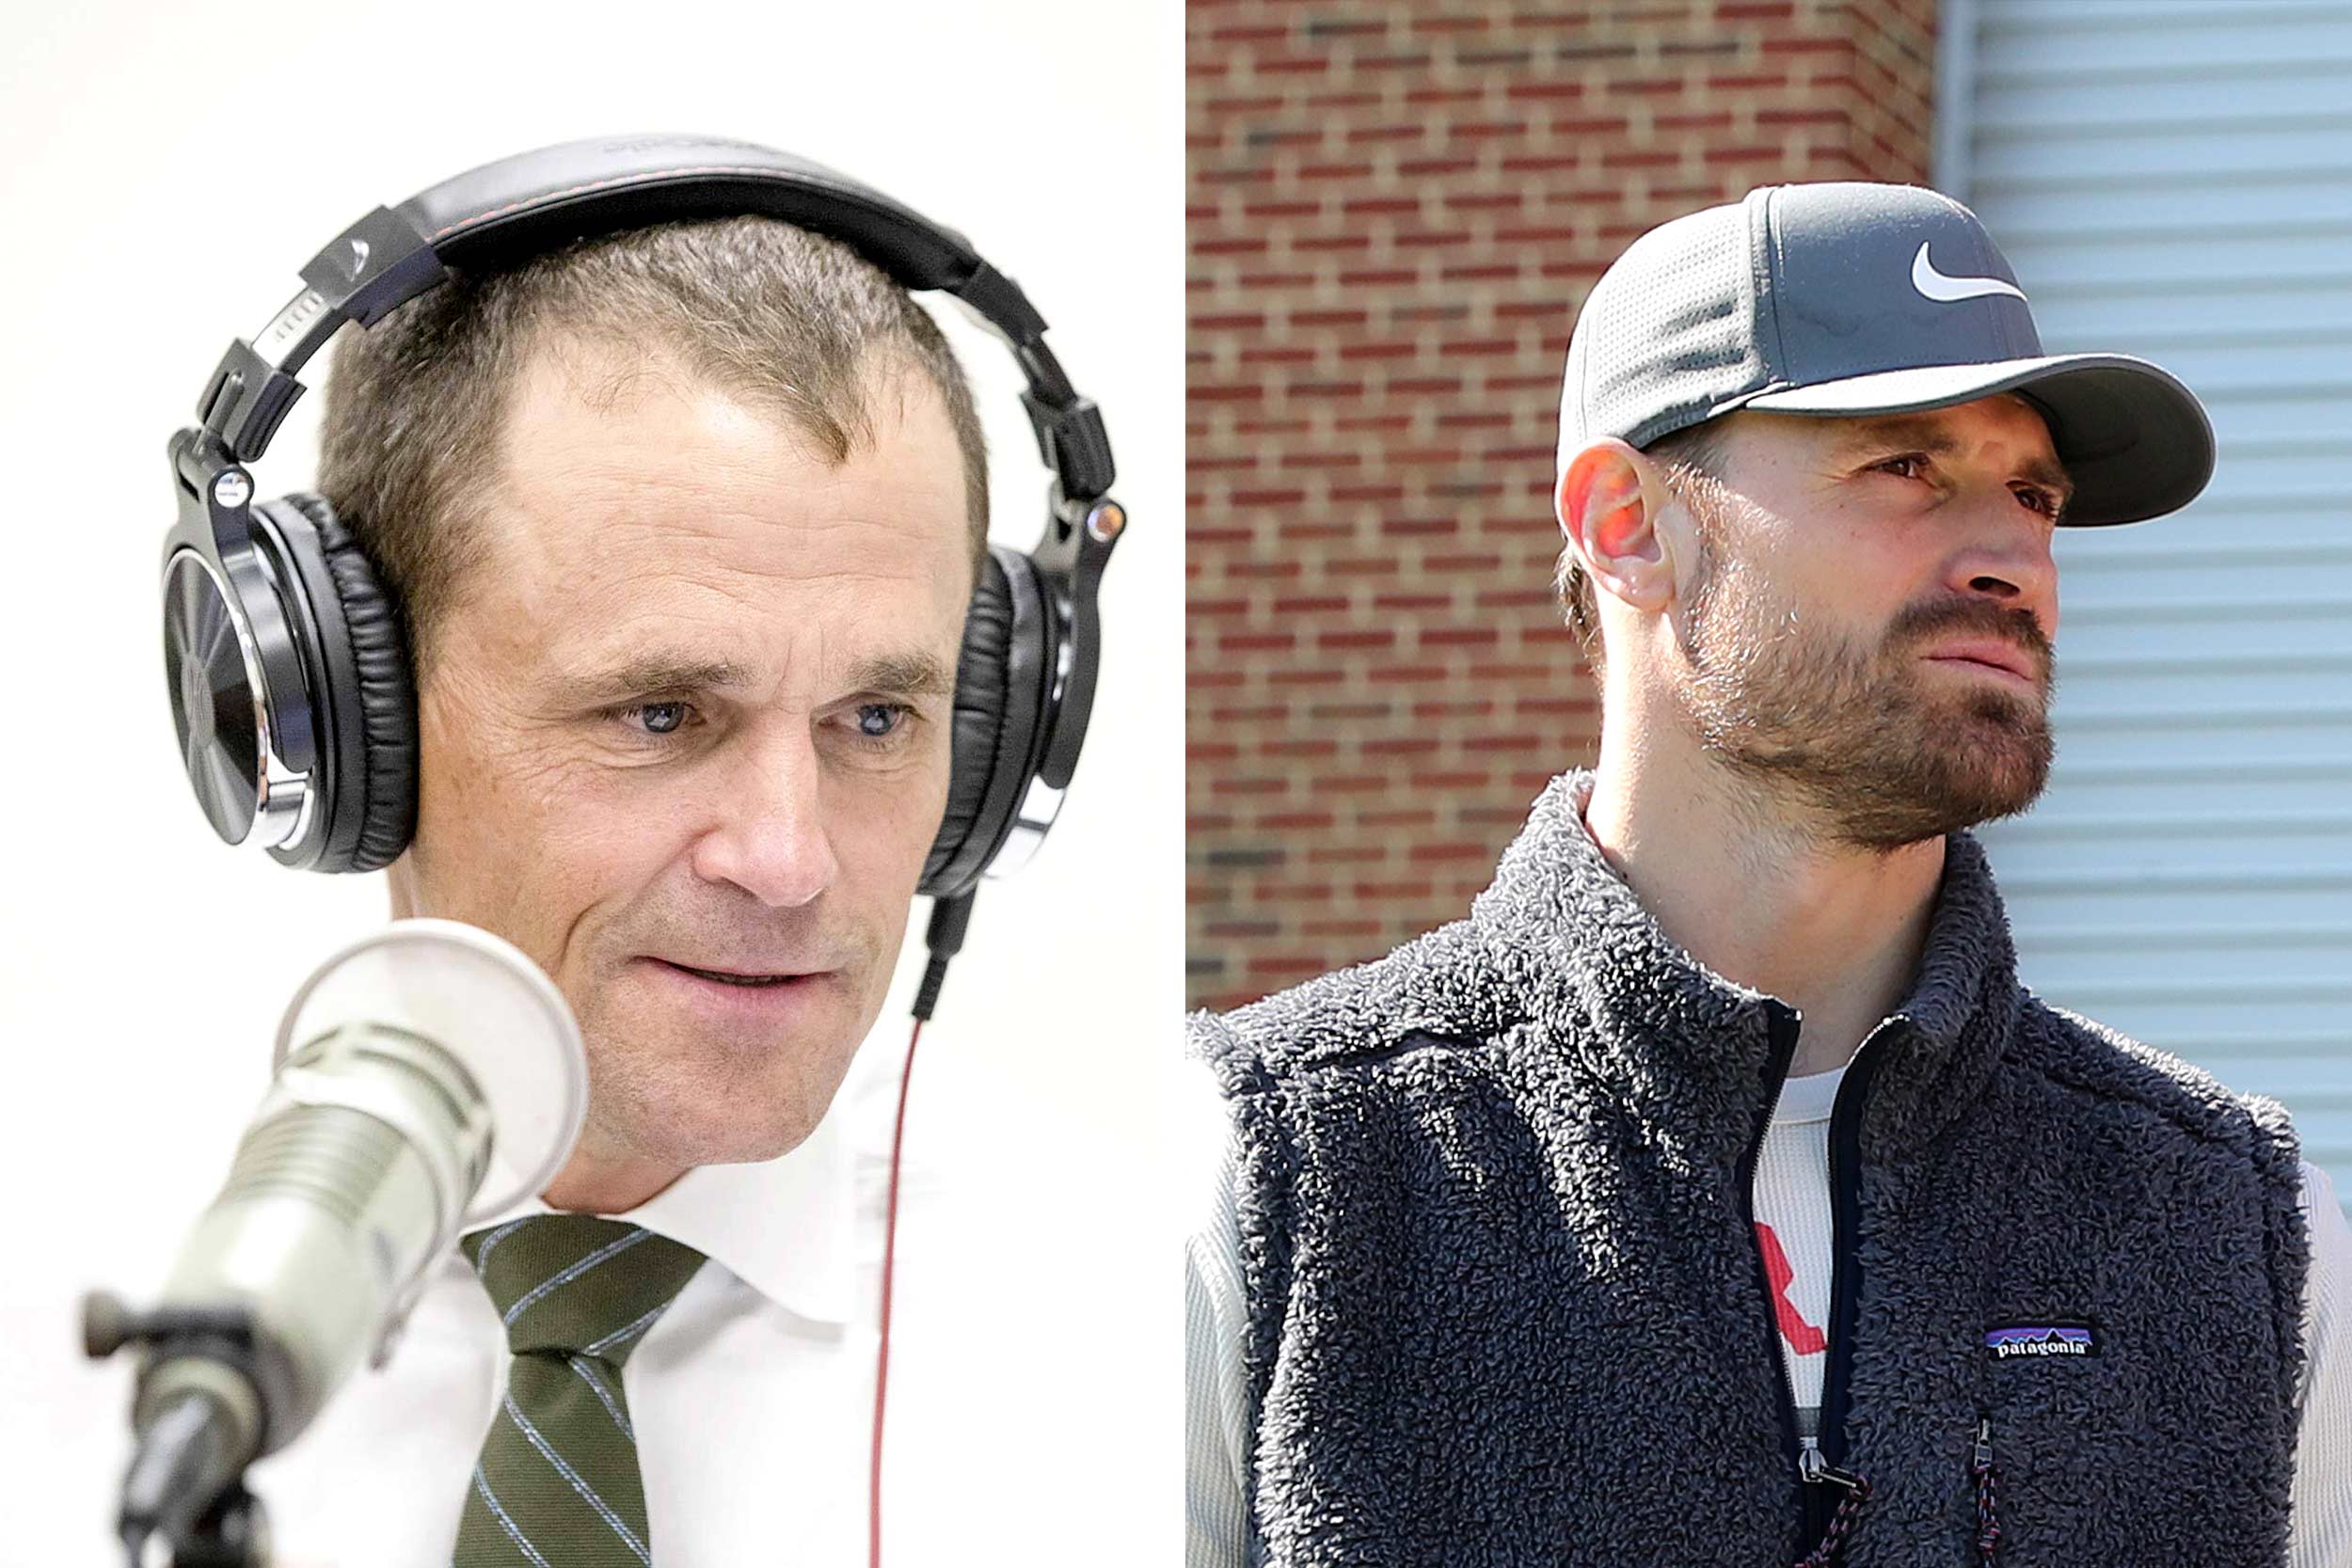 President Jim Ryan on the left with headphones and podcast mic in frame and a portrait of podcast guest Chris Long on the right